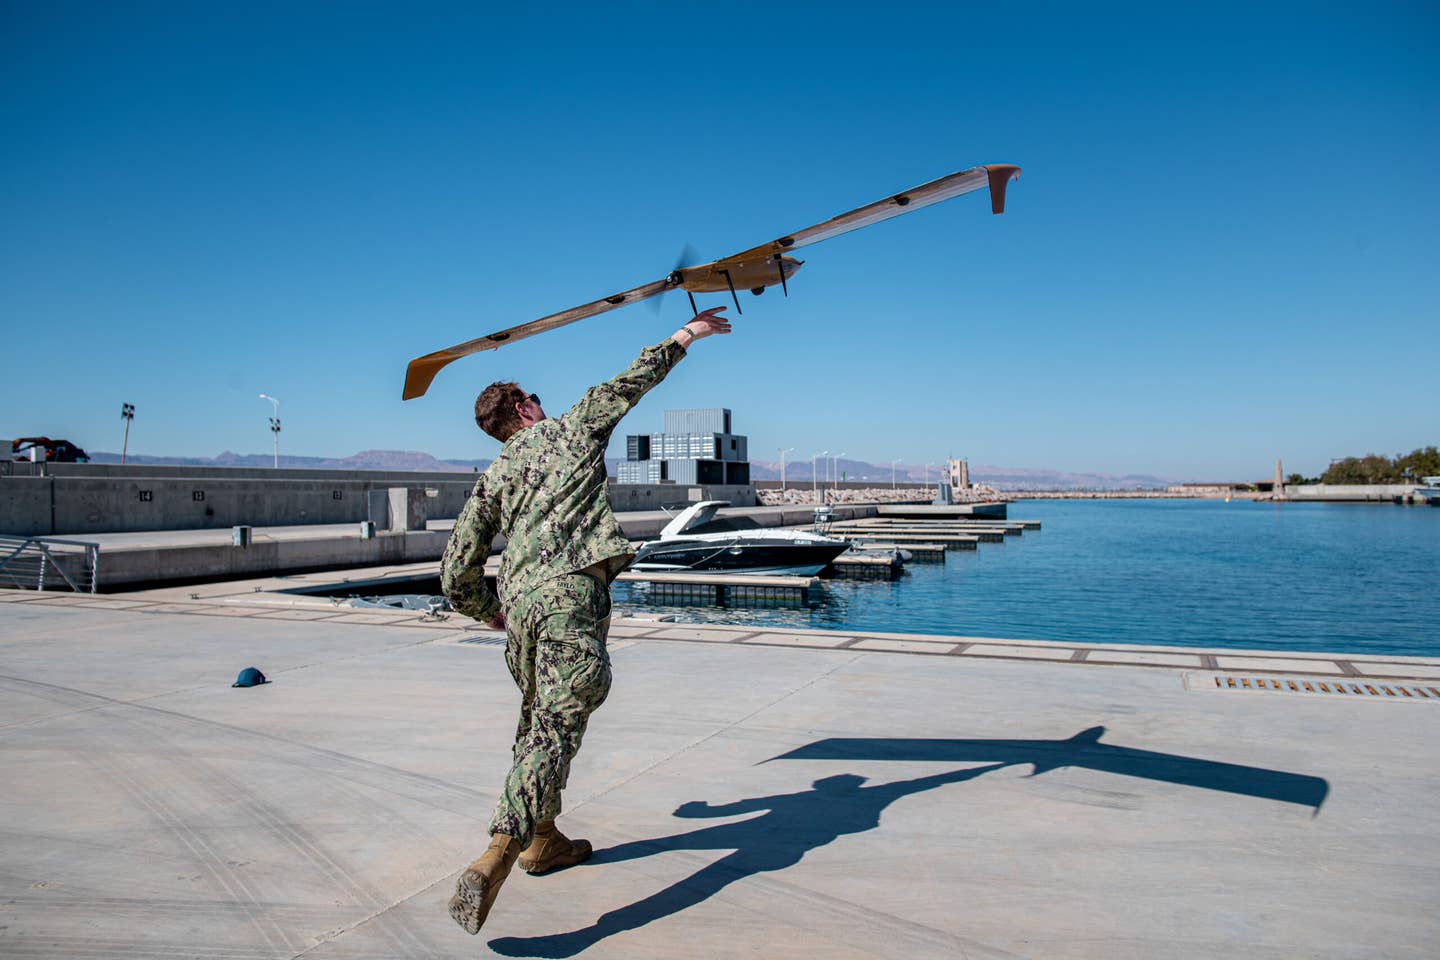 Lt. j.g. Jay Faylo assigned to Task Force 59, launches an M5D Airfox UAS during International Maritime Exercise/Cutlass Express 2022 Feb. 13. <em>Credit: U.S. Navy photo by Mass Communication Specialist 2nd Class Dawson Roth</em>